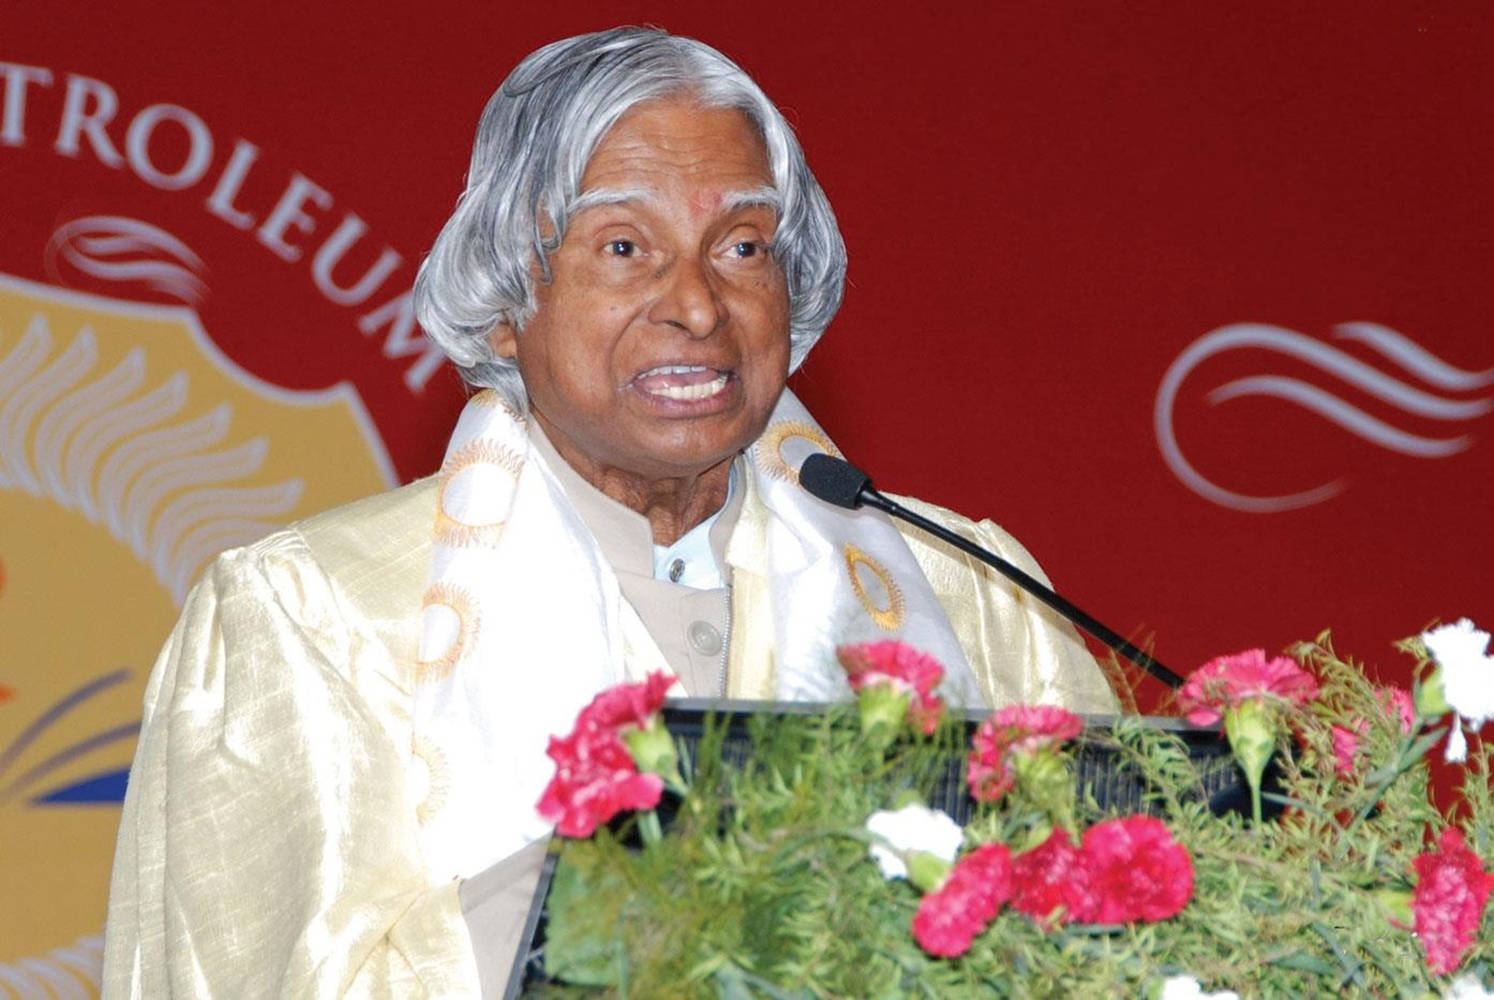 Former Indian President Dr. A.p.j Abdul Kalam Delivering A Powerful Speech.